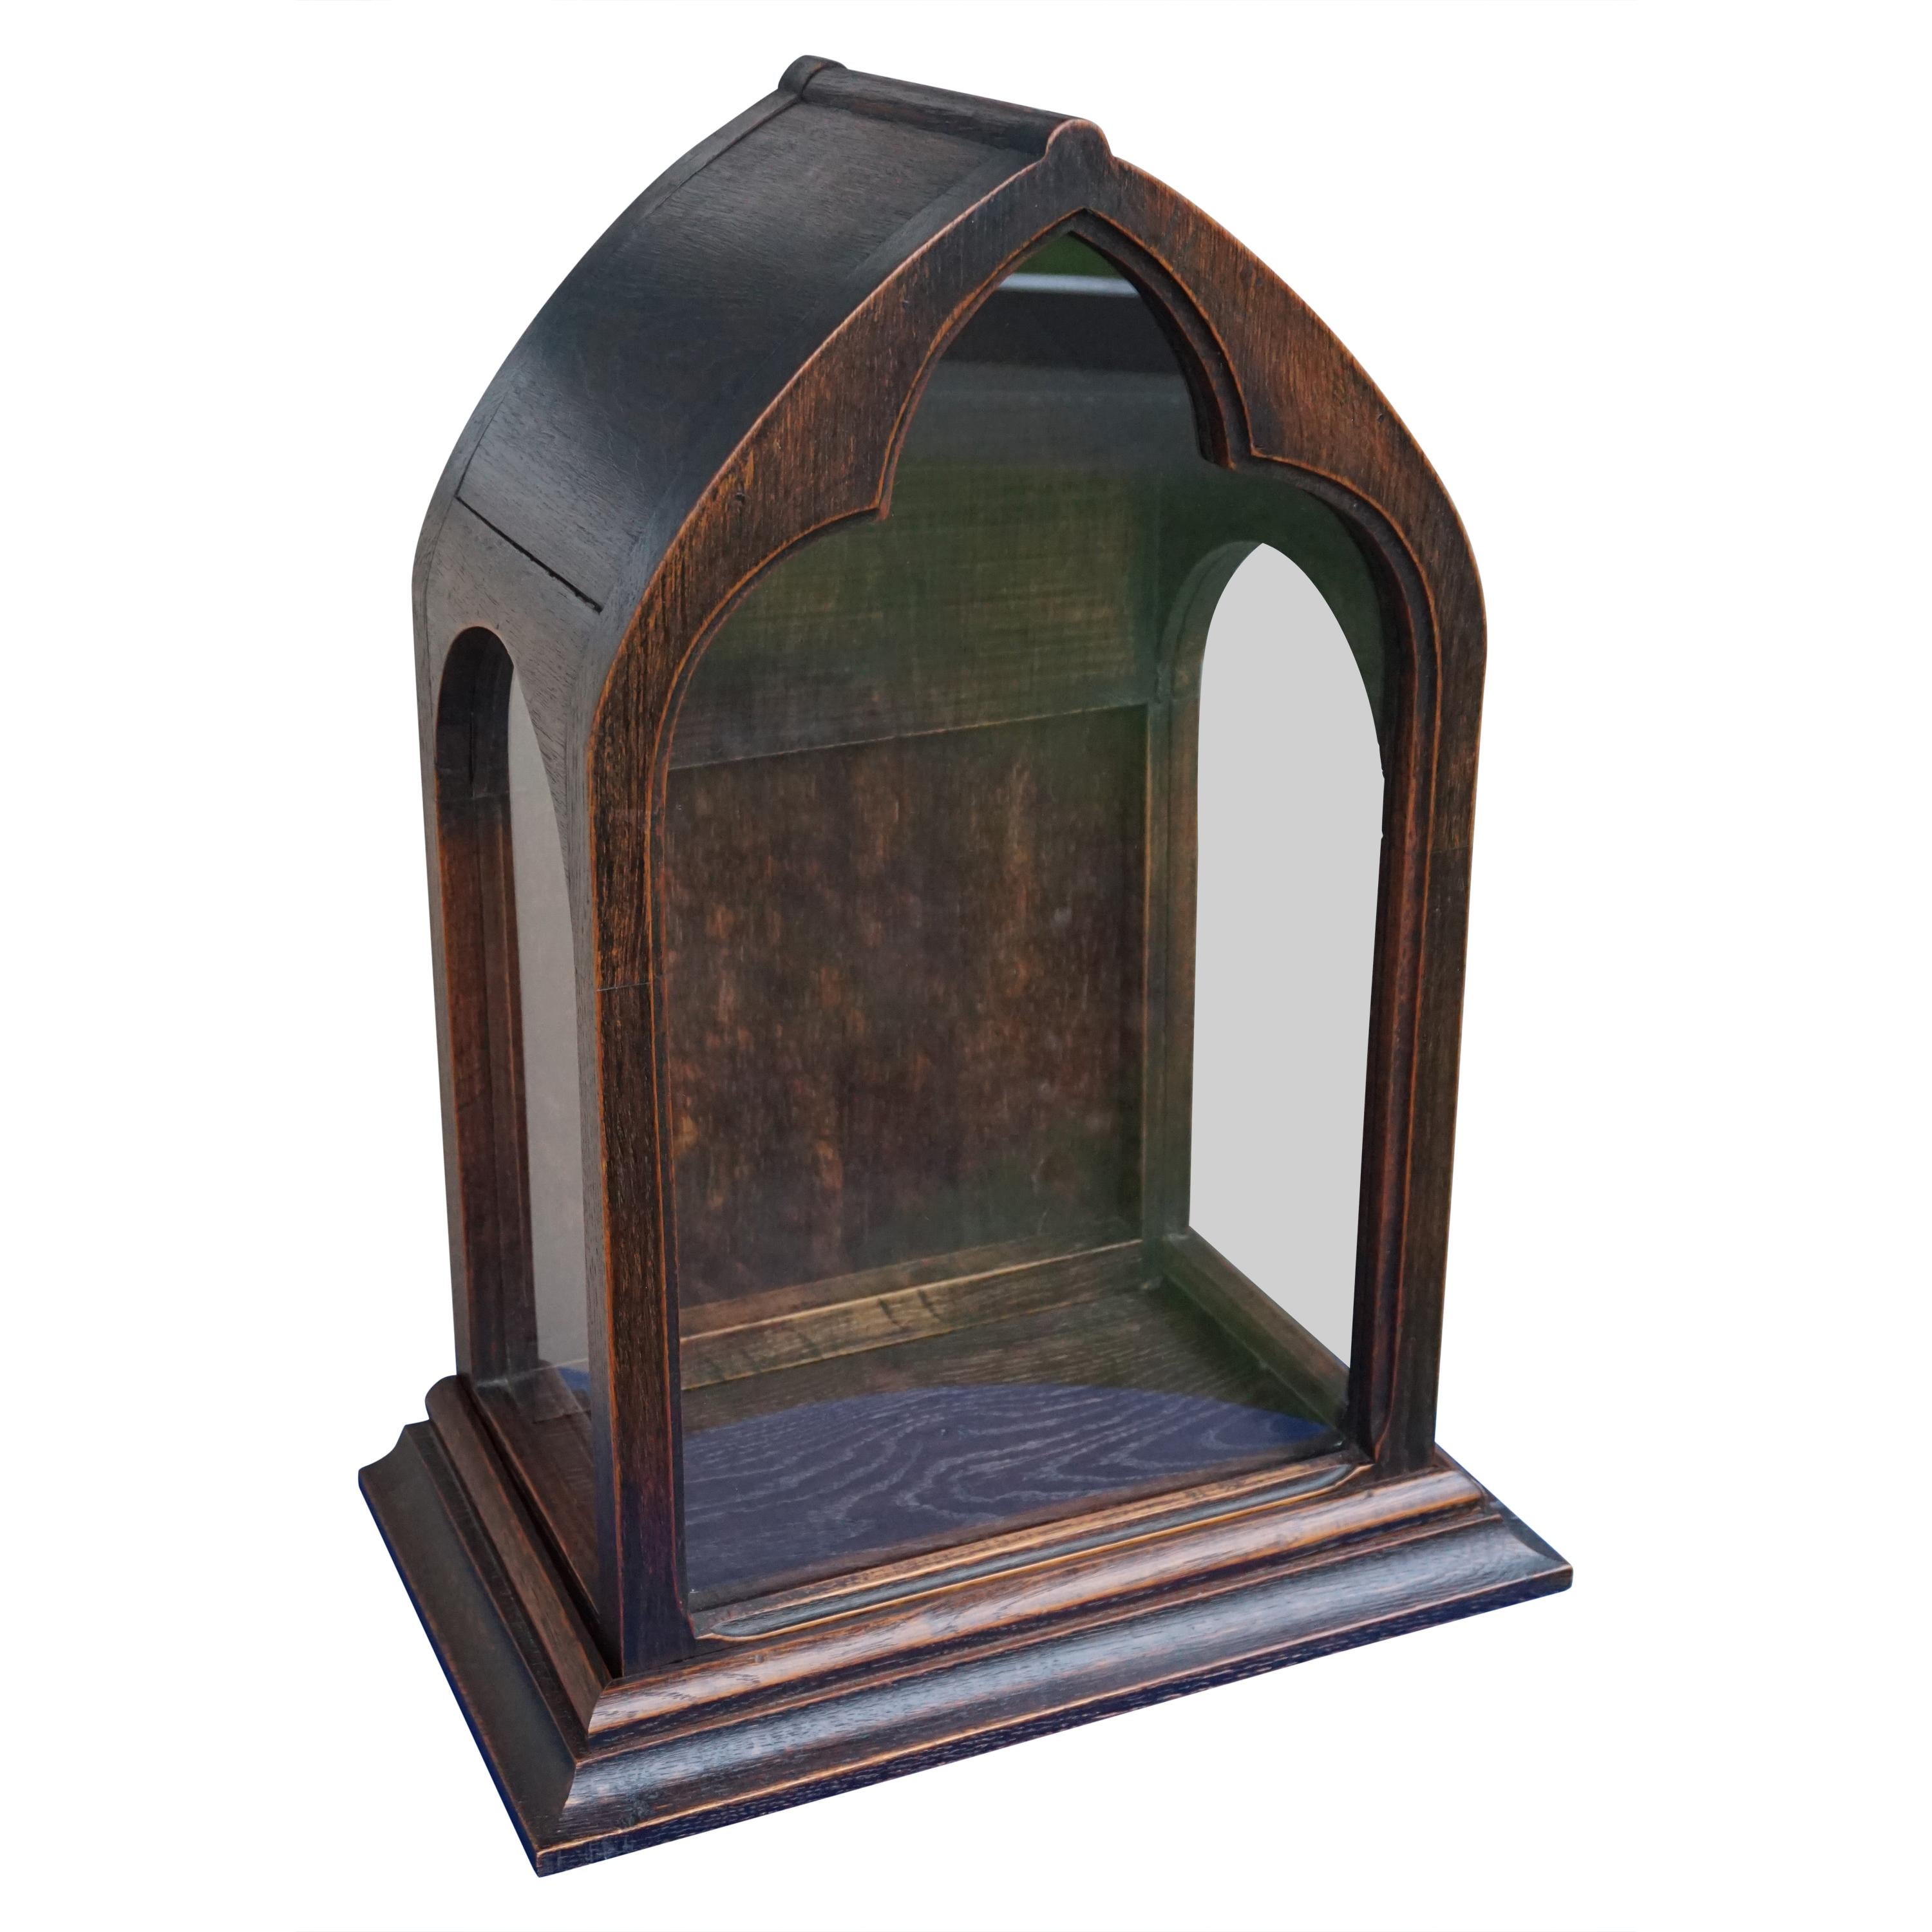 Antique Gothic Revival Glass and Oak Chapel / Display Cabinet for a Saint Statue